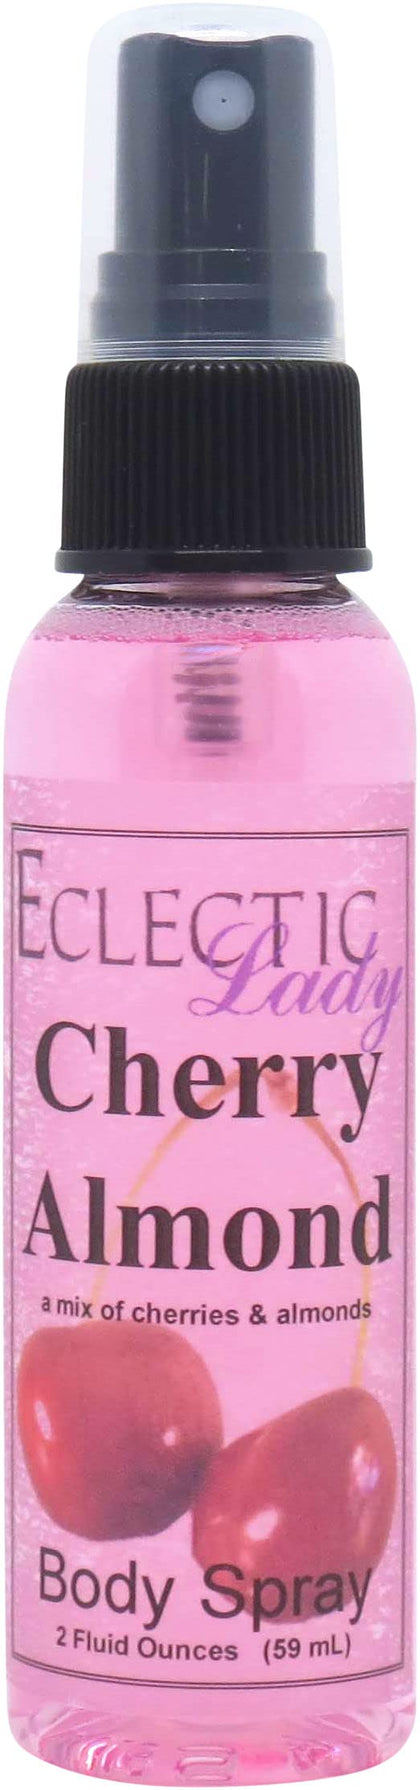 Cherry Almond Body Spray, 2 ounces, Body Mist for Women with Clean, Light & Gentle Fragrance, Long Lasting Perfume with Comforting Scent for Men & Women, Cologne with Soft, Subtle Aroma For Daily Use